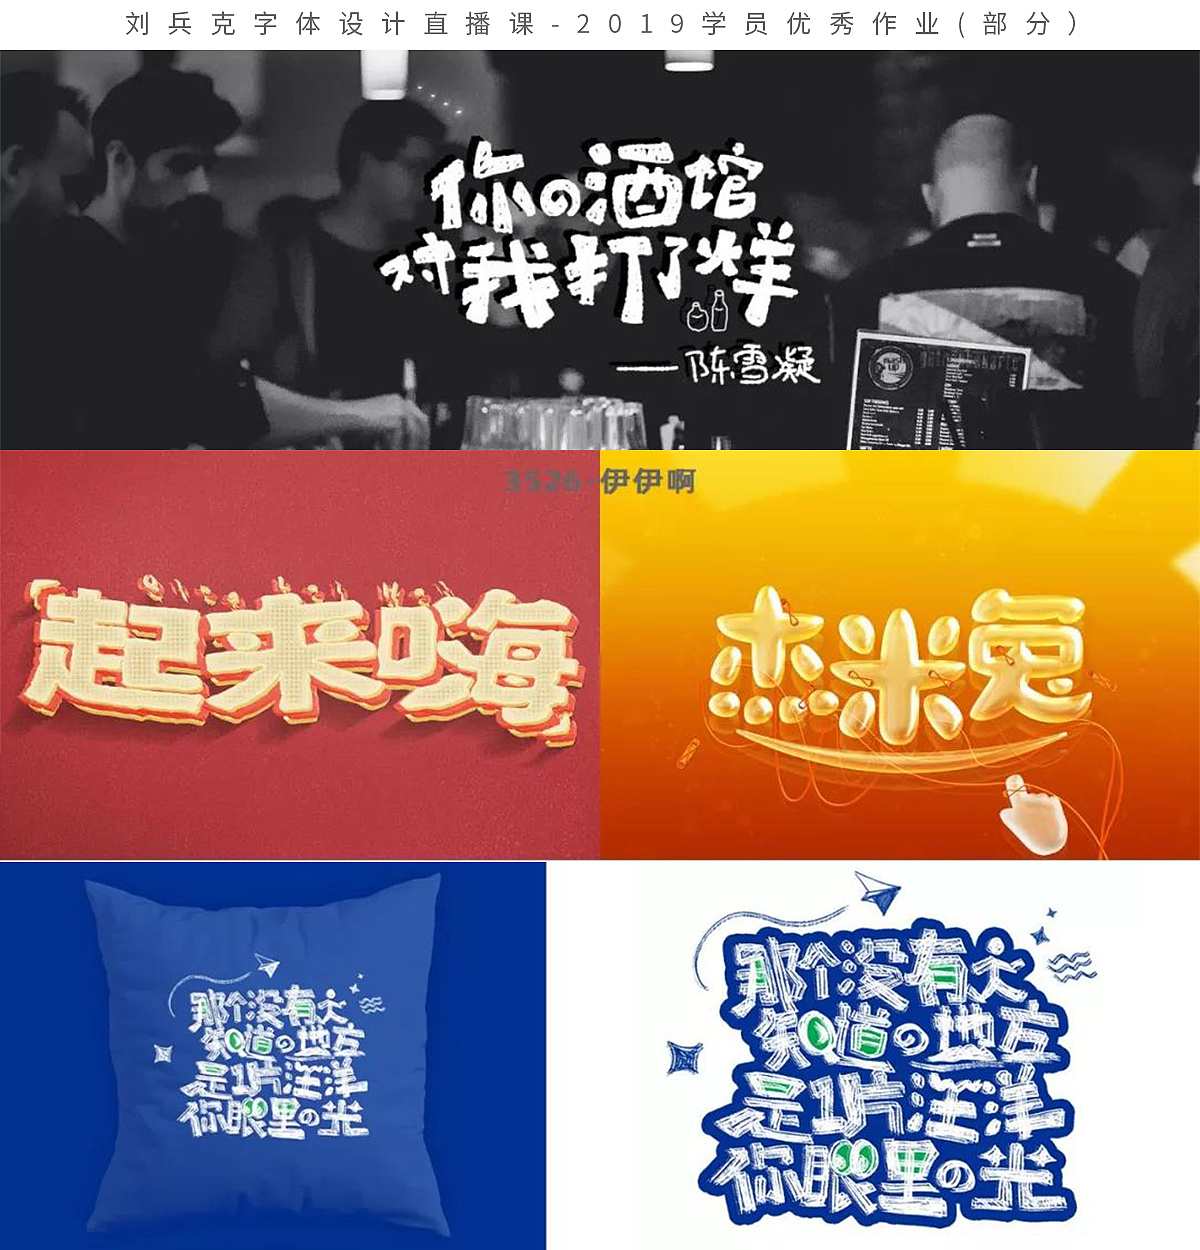 Chinese Creative Font Design-This wave, a total of 100, has about 400 excellent creative font works